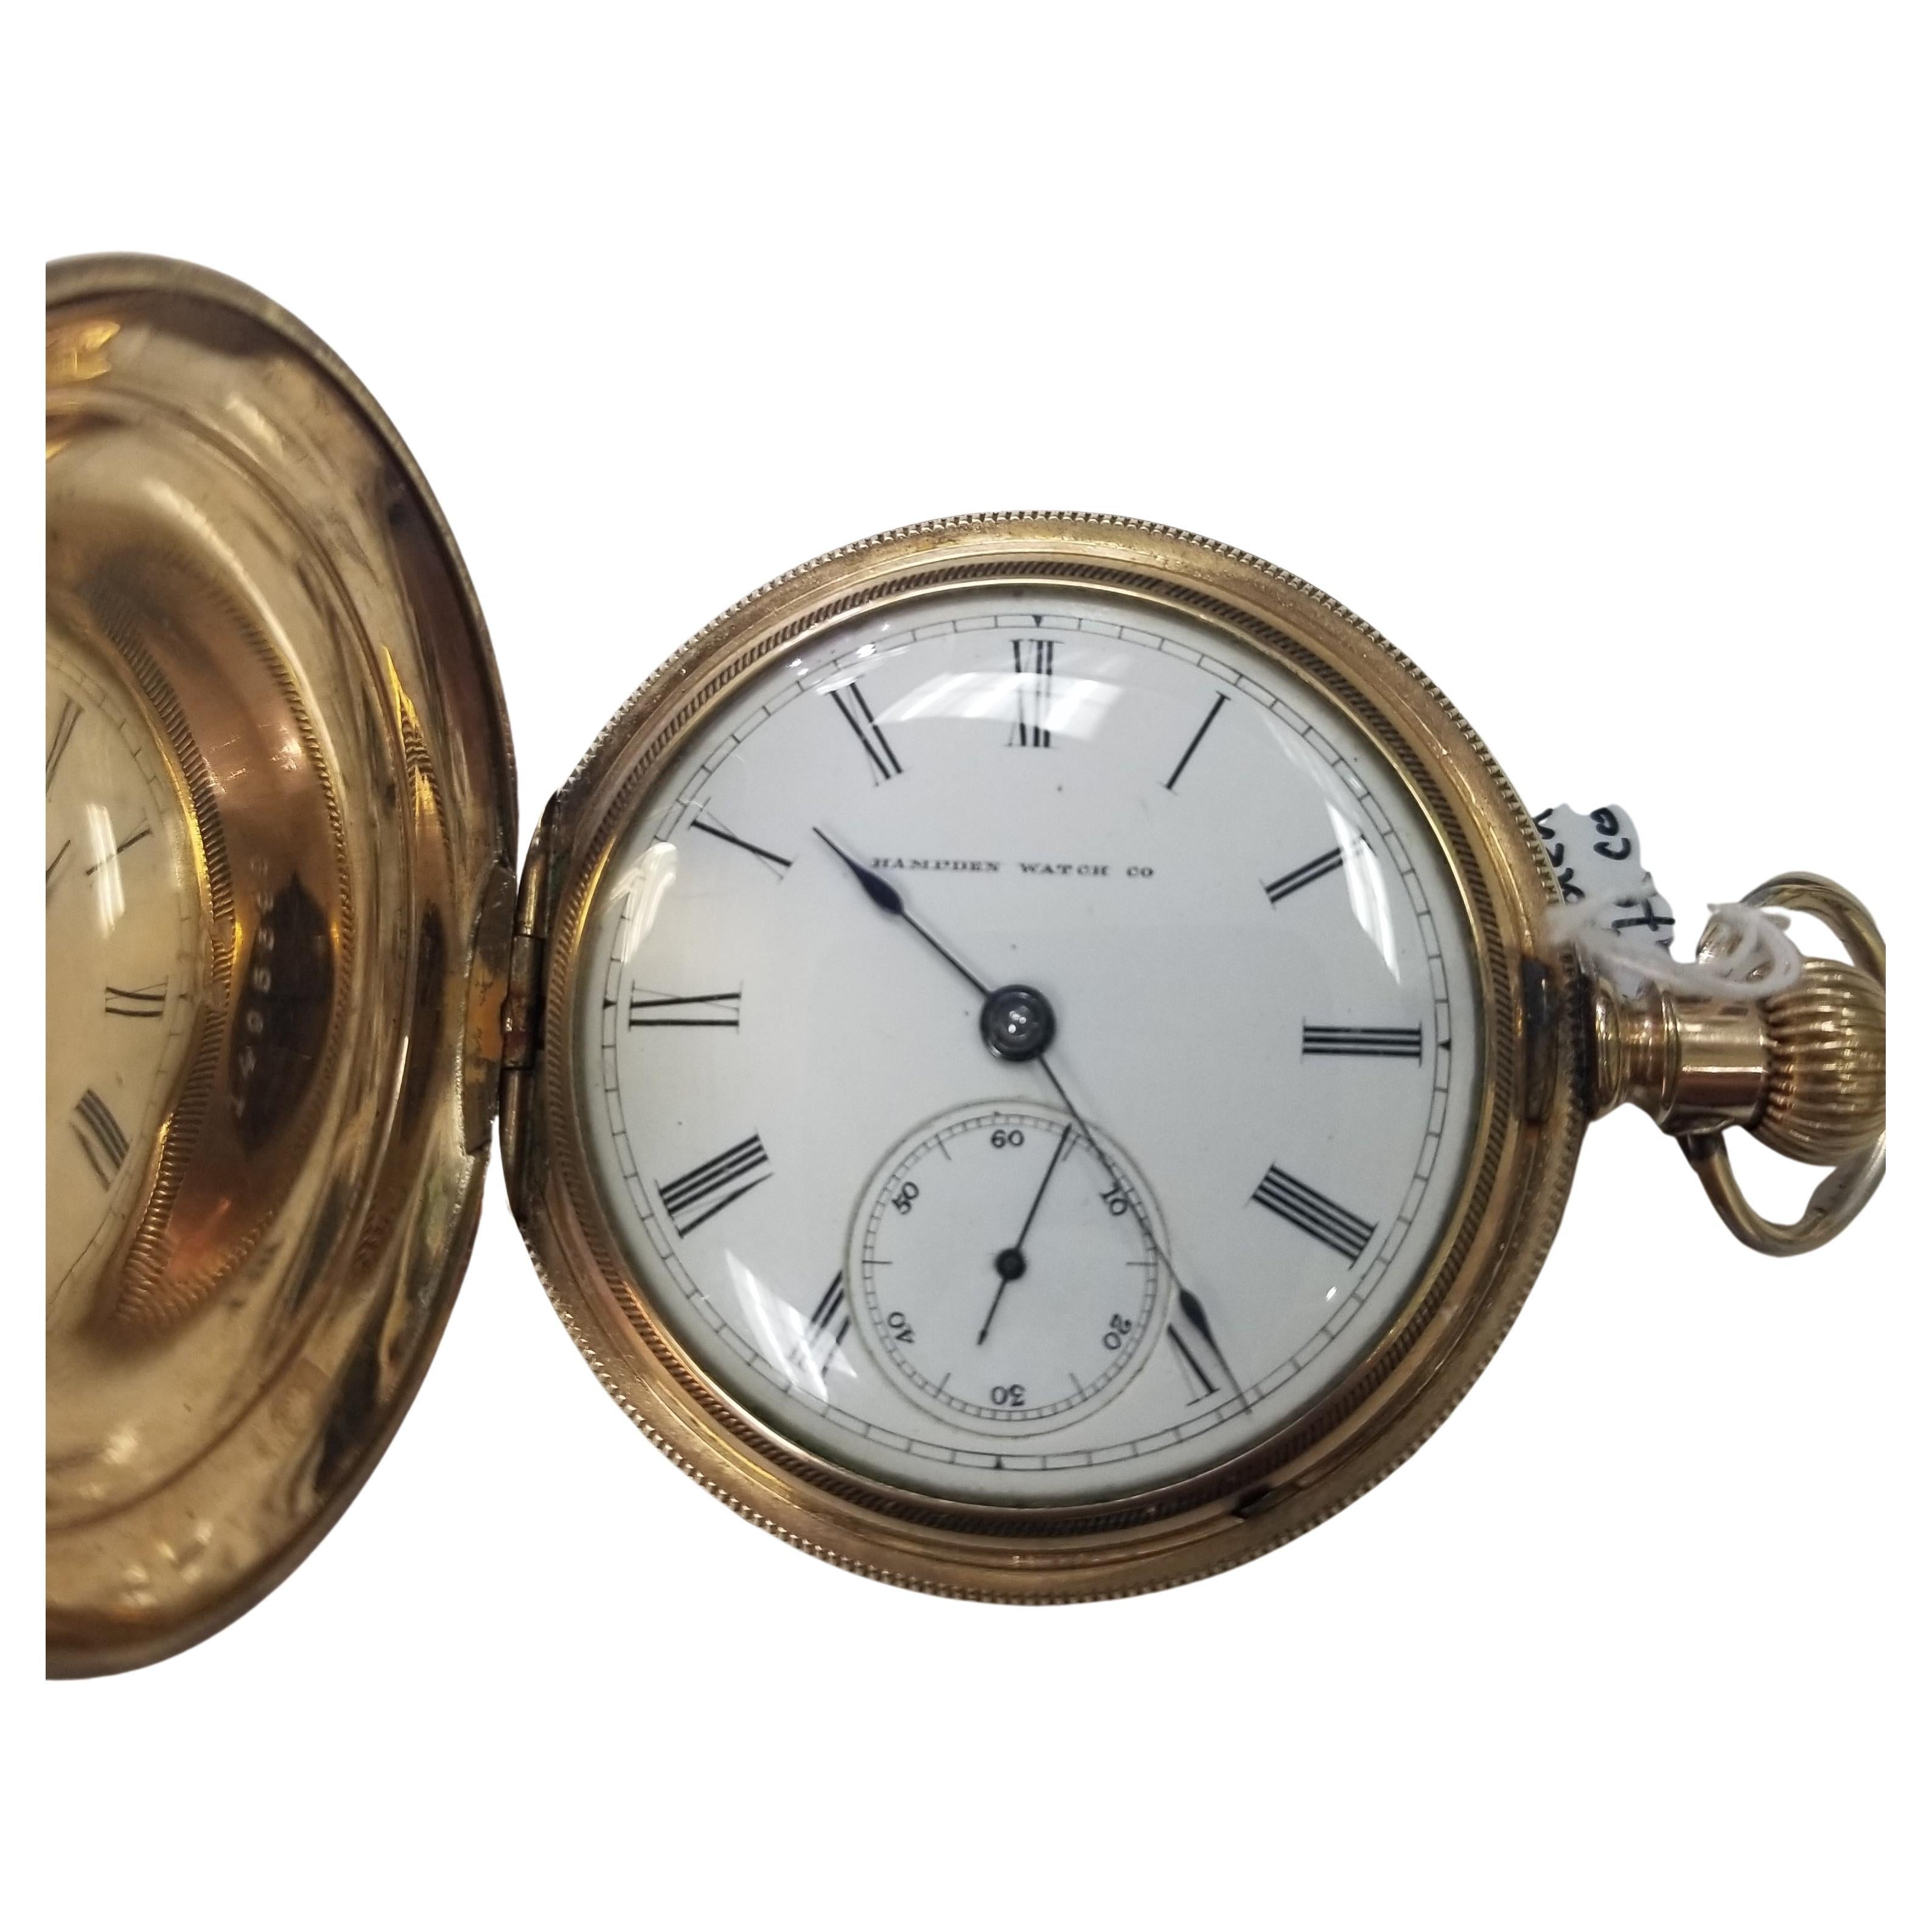 Hampden Watch Co. Gold Plated White Dial 1900-1909 For Sale